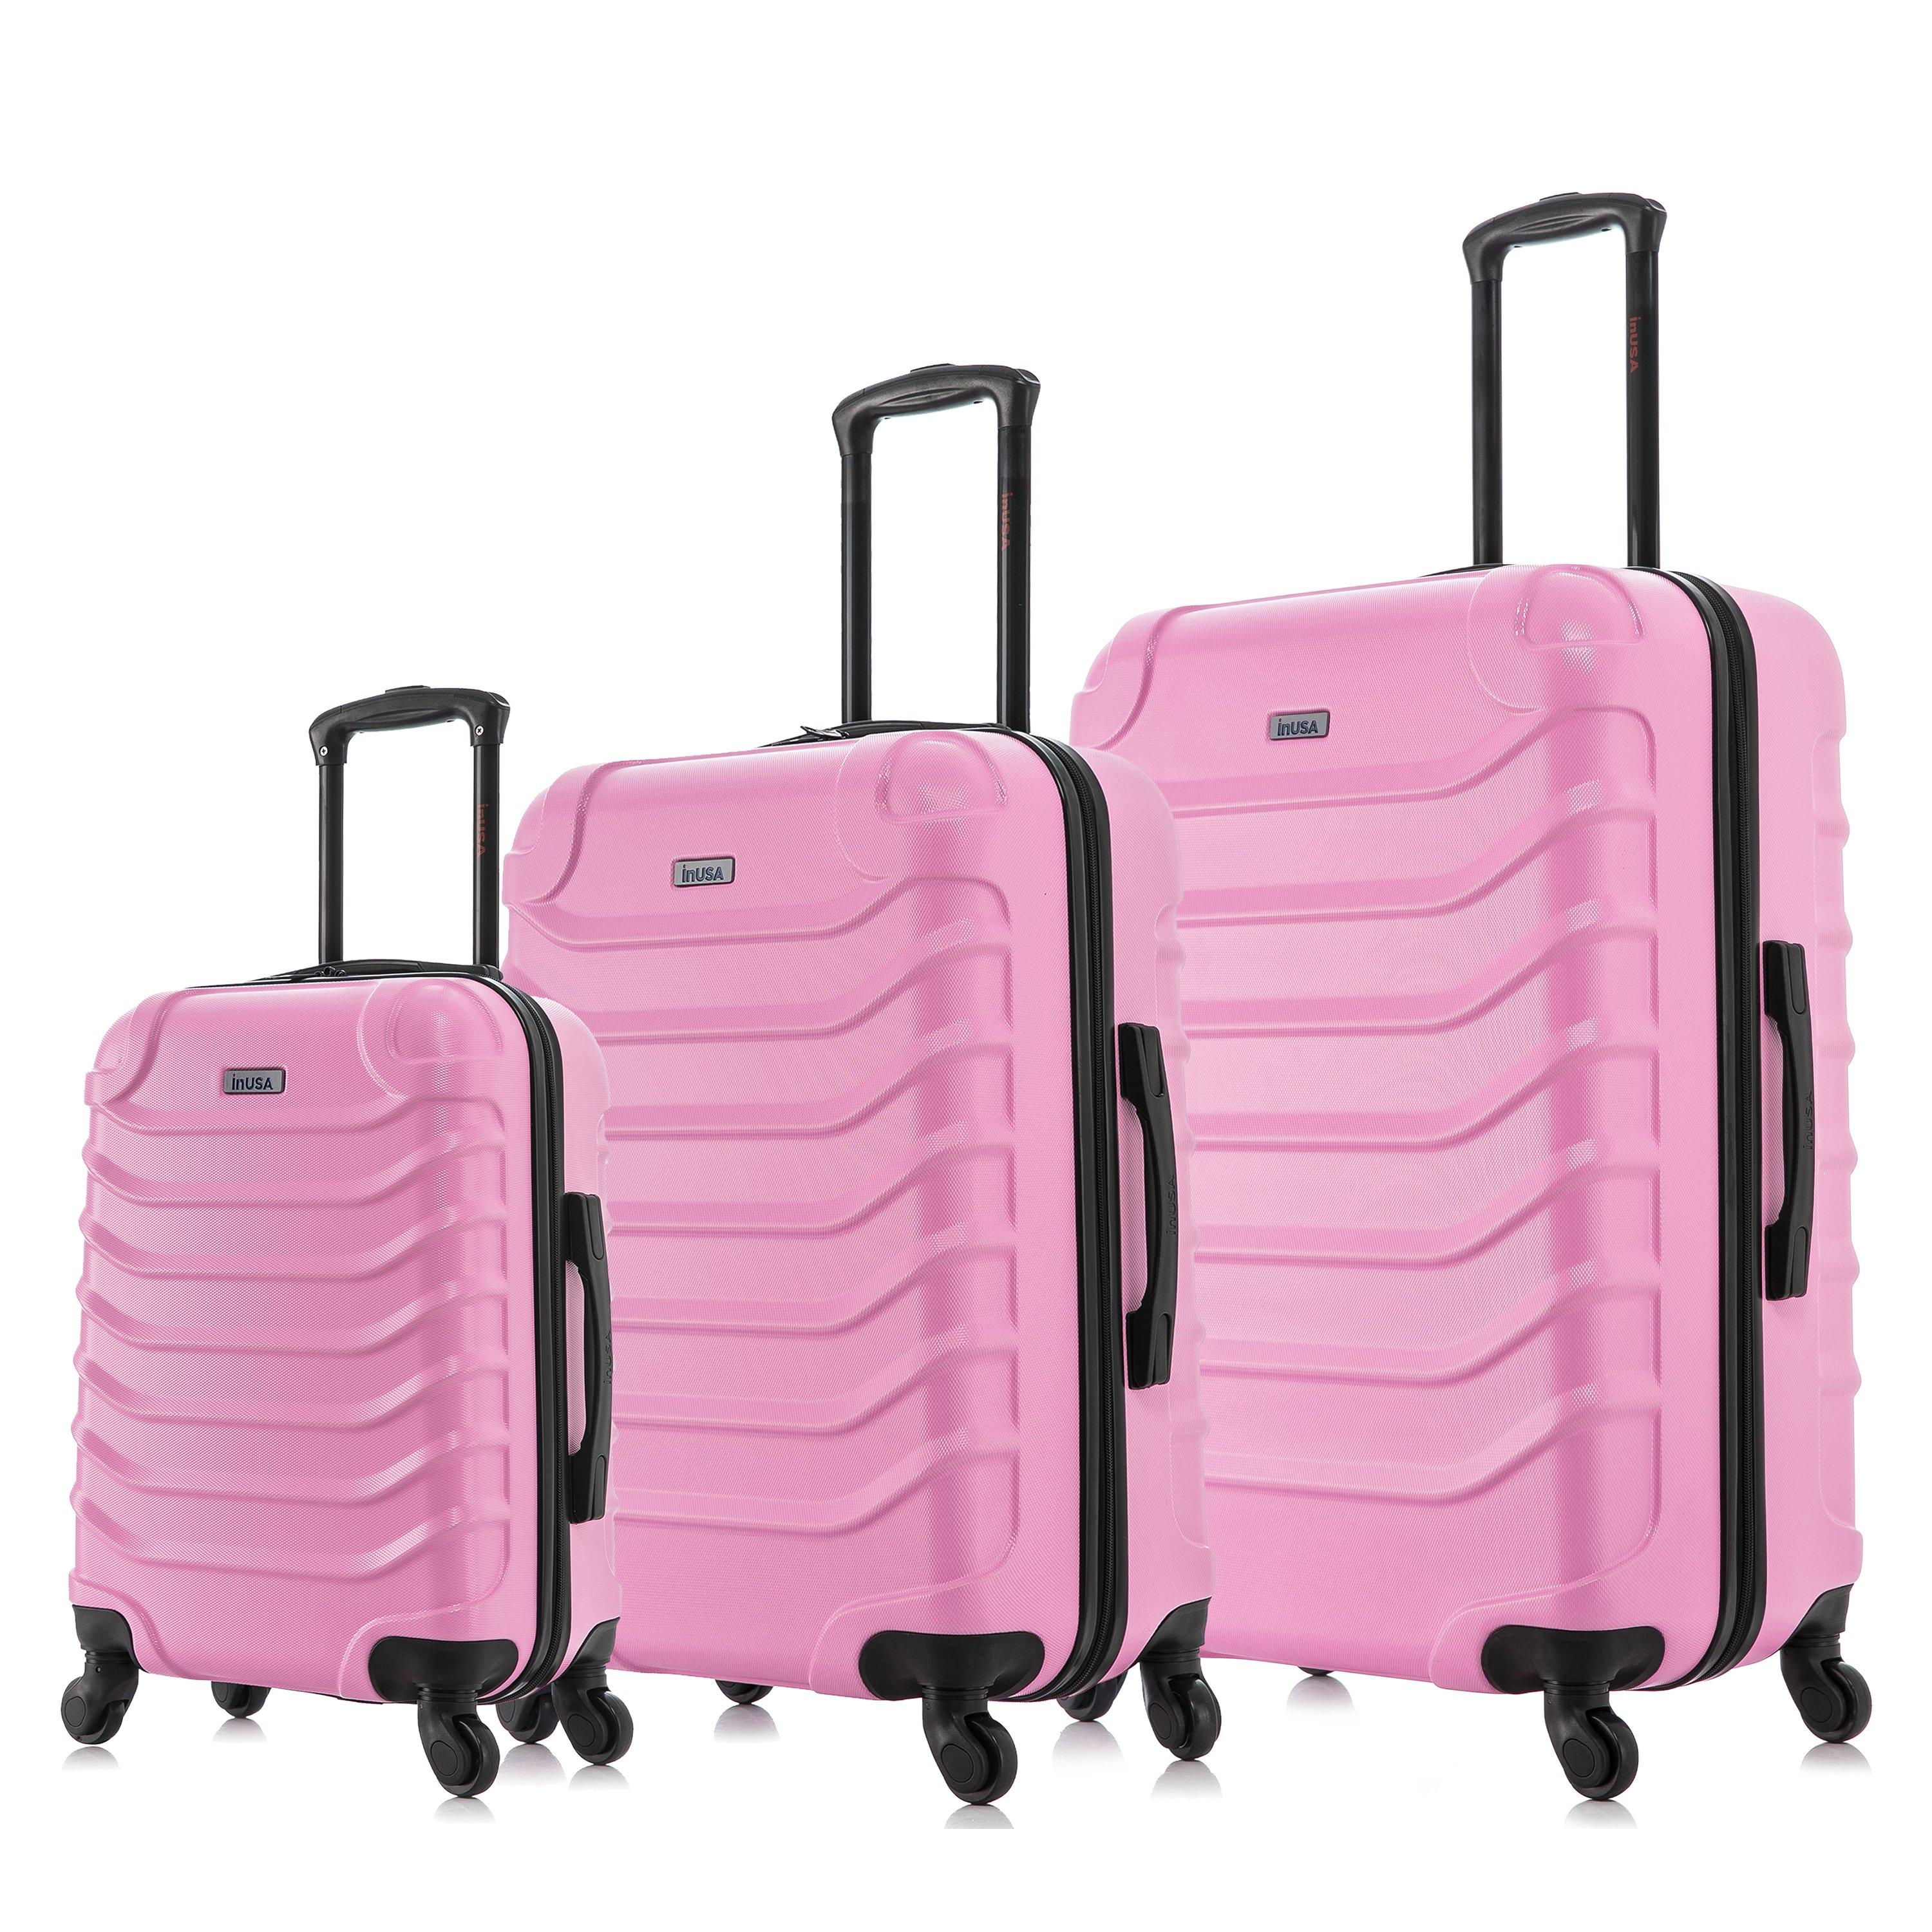 Photos - Suitcase / Backpack Cover InUSA Endurance Hardside Lightweight Spin 3 pc Luggage Set 